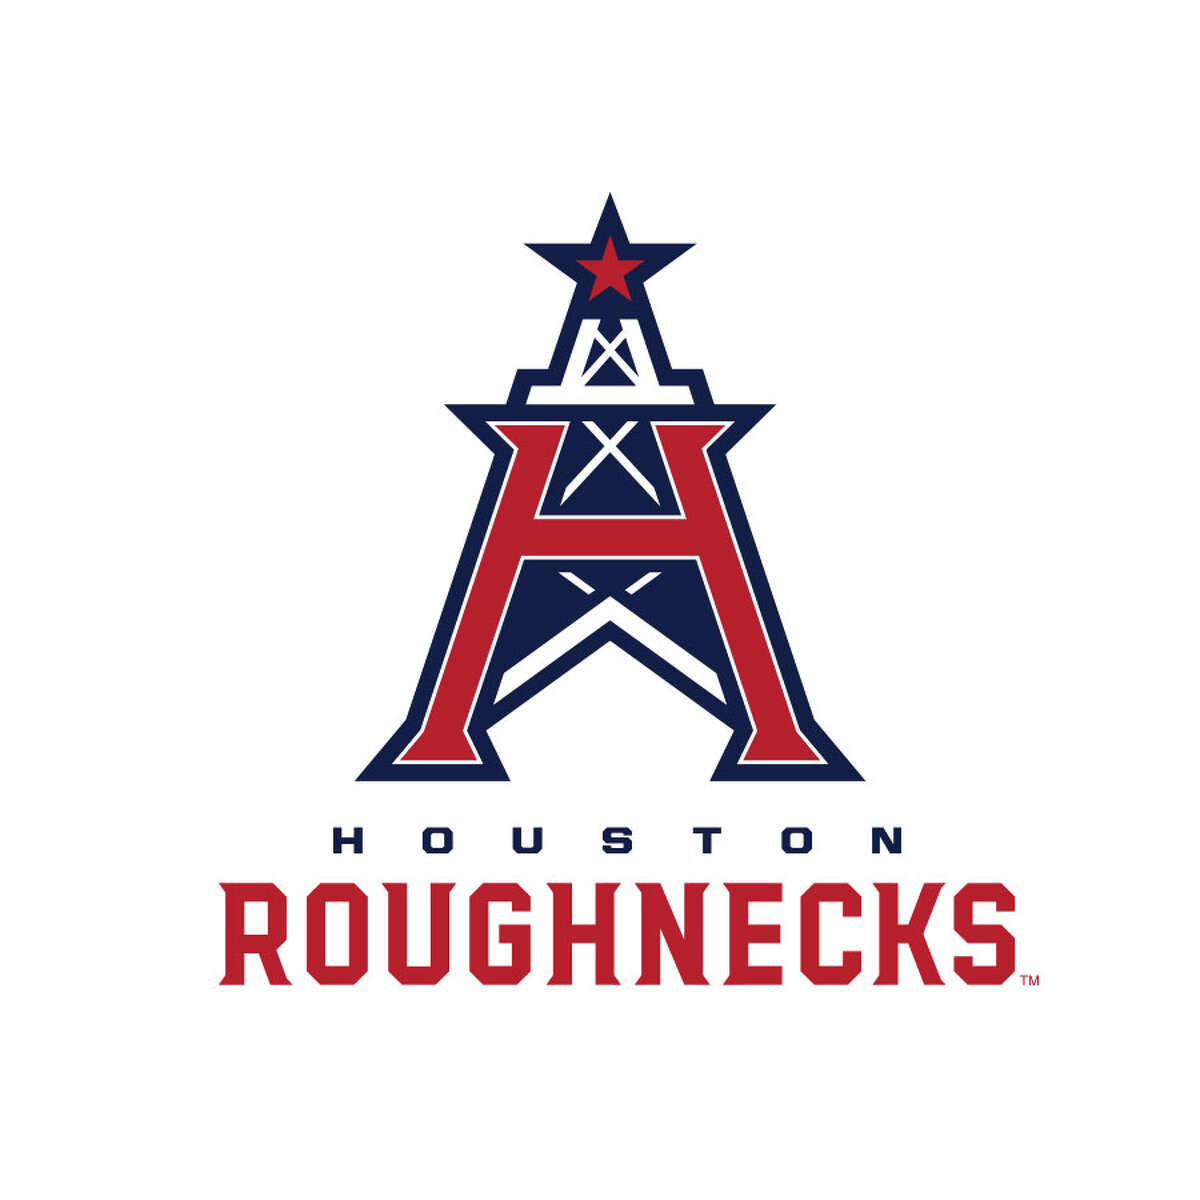 PHOTOS: The name and logo for all eight XFL teams When the XFL kicks off in 2020, the Houston team will be the Roughnecks with a familiar oil derrick as the team's logo. Browse through the photos above for a look at each XFL team's name and logo for the 2020 season ...